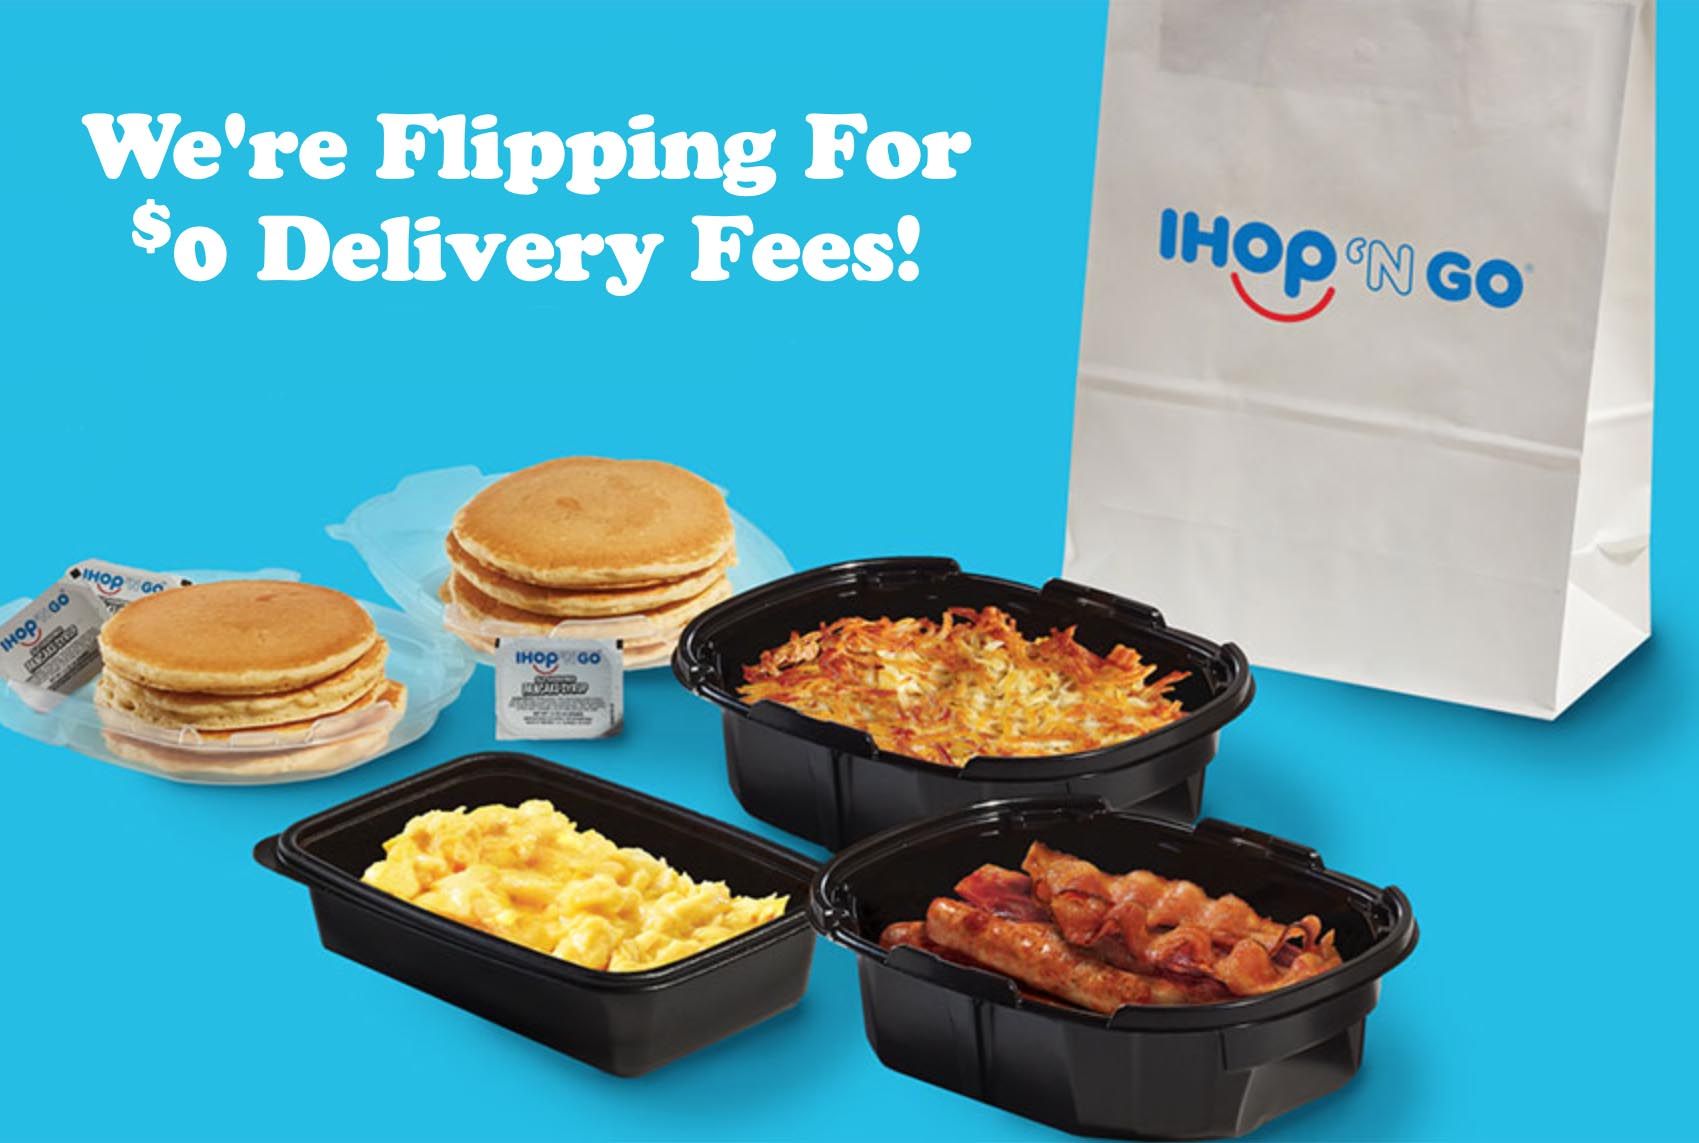 Enjoy a $0 Delivery Fee with In-app or Online IHOP Orders Through to September 12